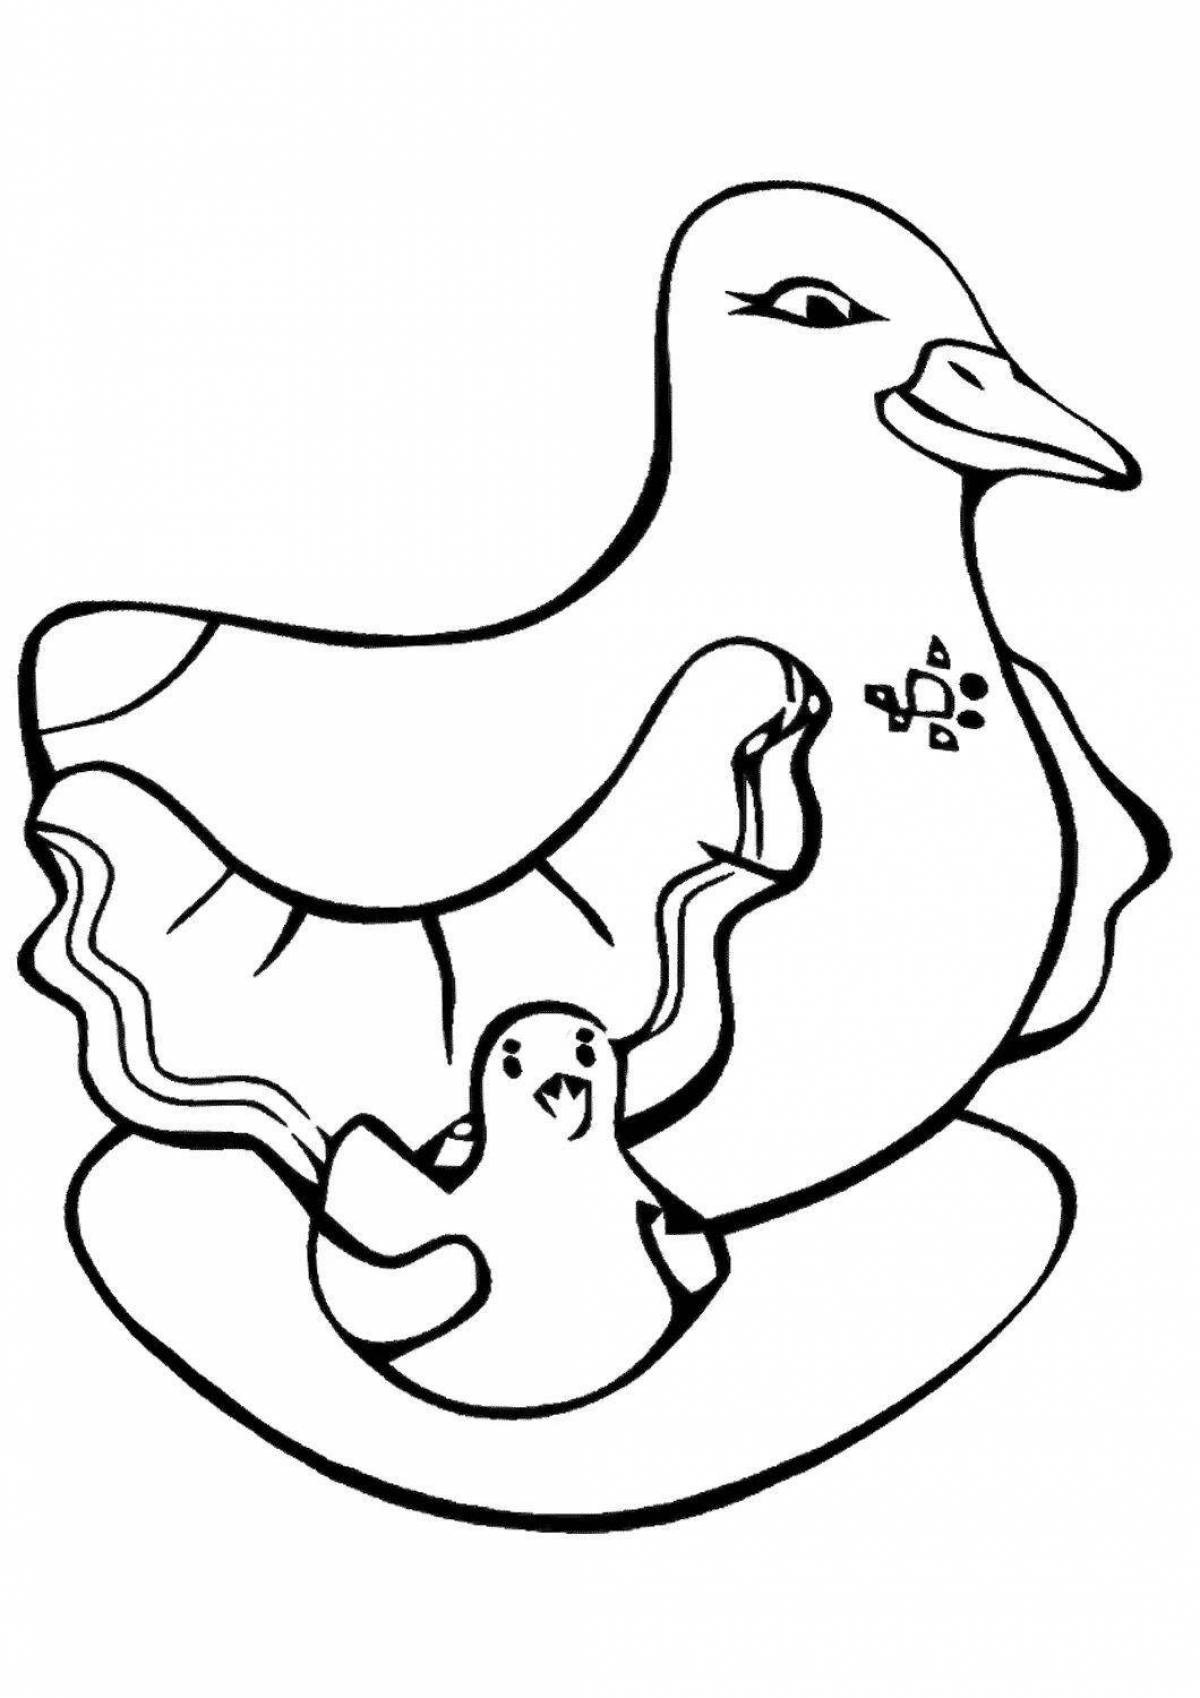 Adorable Dymkovo Duck Coloring Page for Young Children